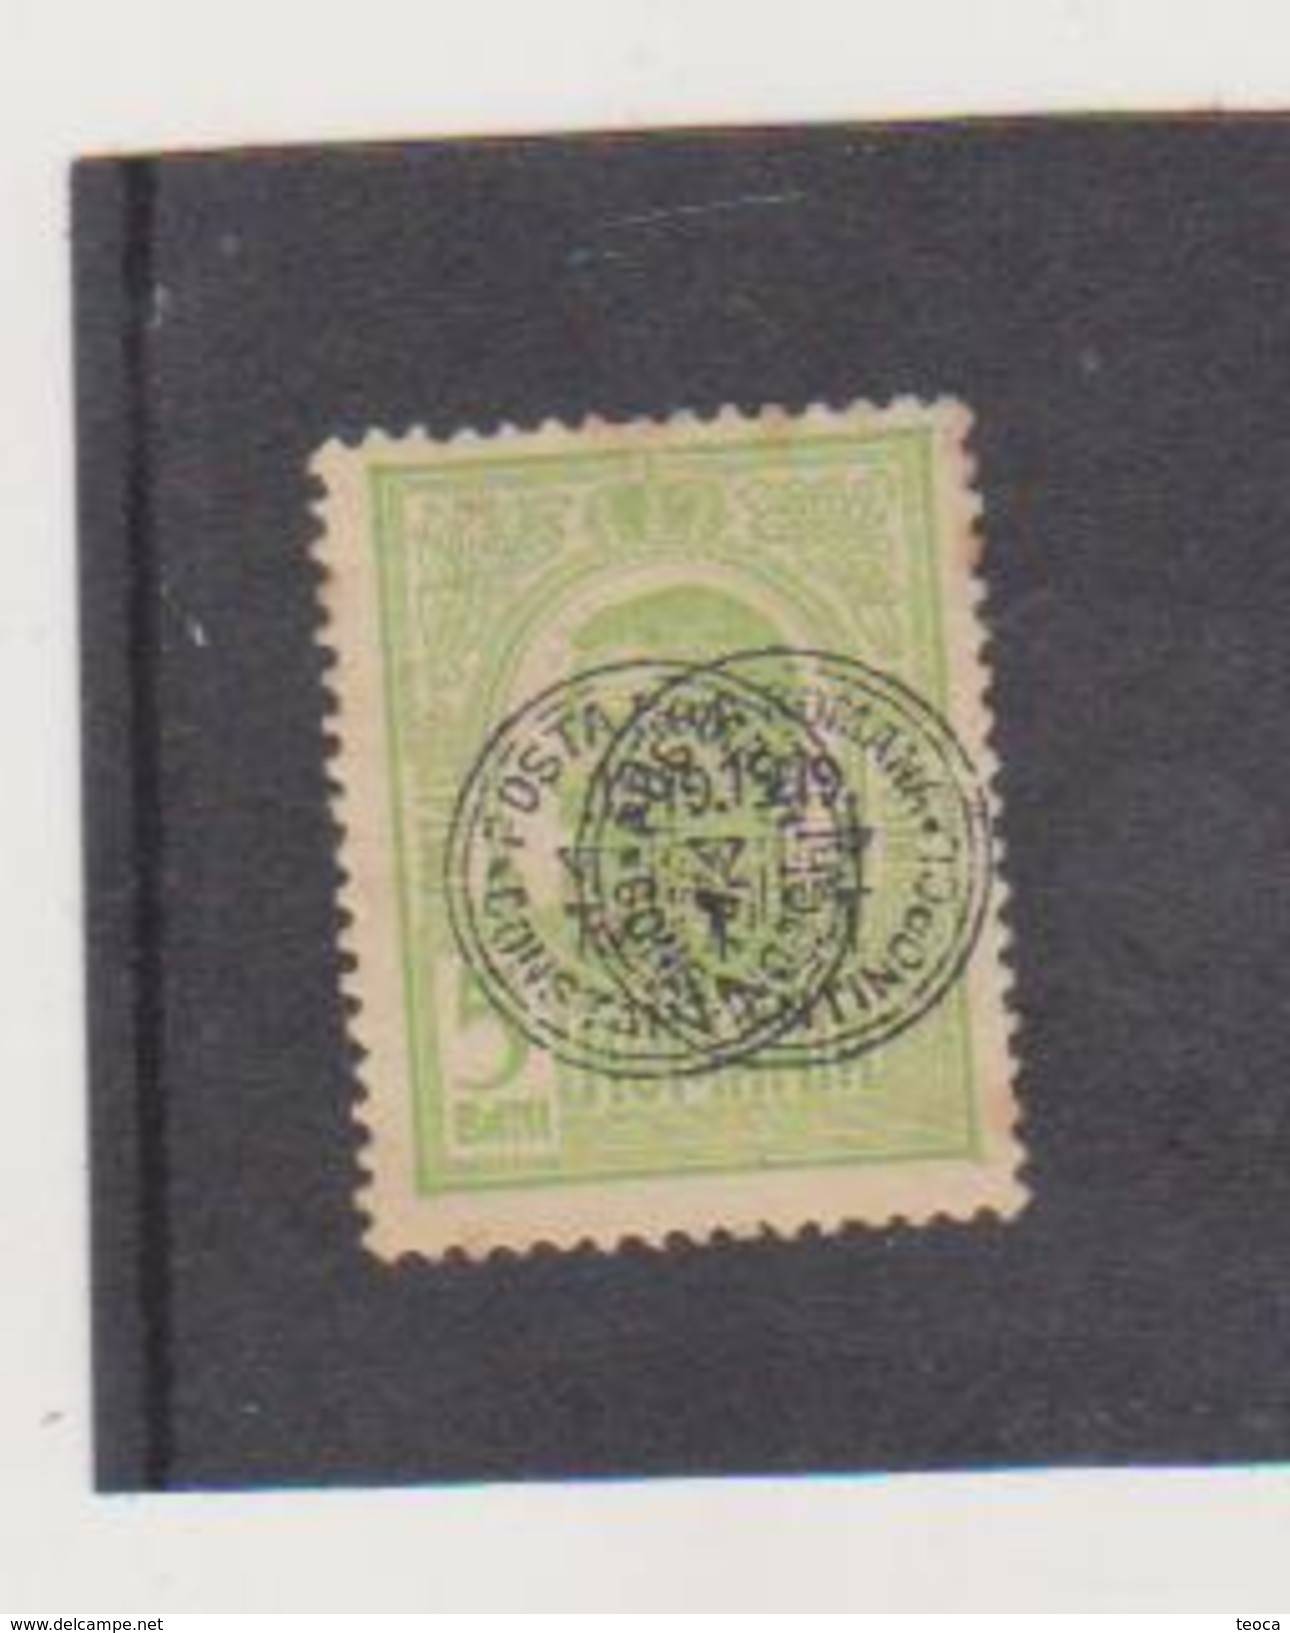 Stamps Errors Romania  1919 King Charles I, With Double Surcharges OCCUPATION  TURKEY -CONSTANTINOPOLE 1919  -UNUSED - Ungebraucht